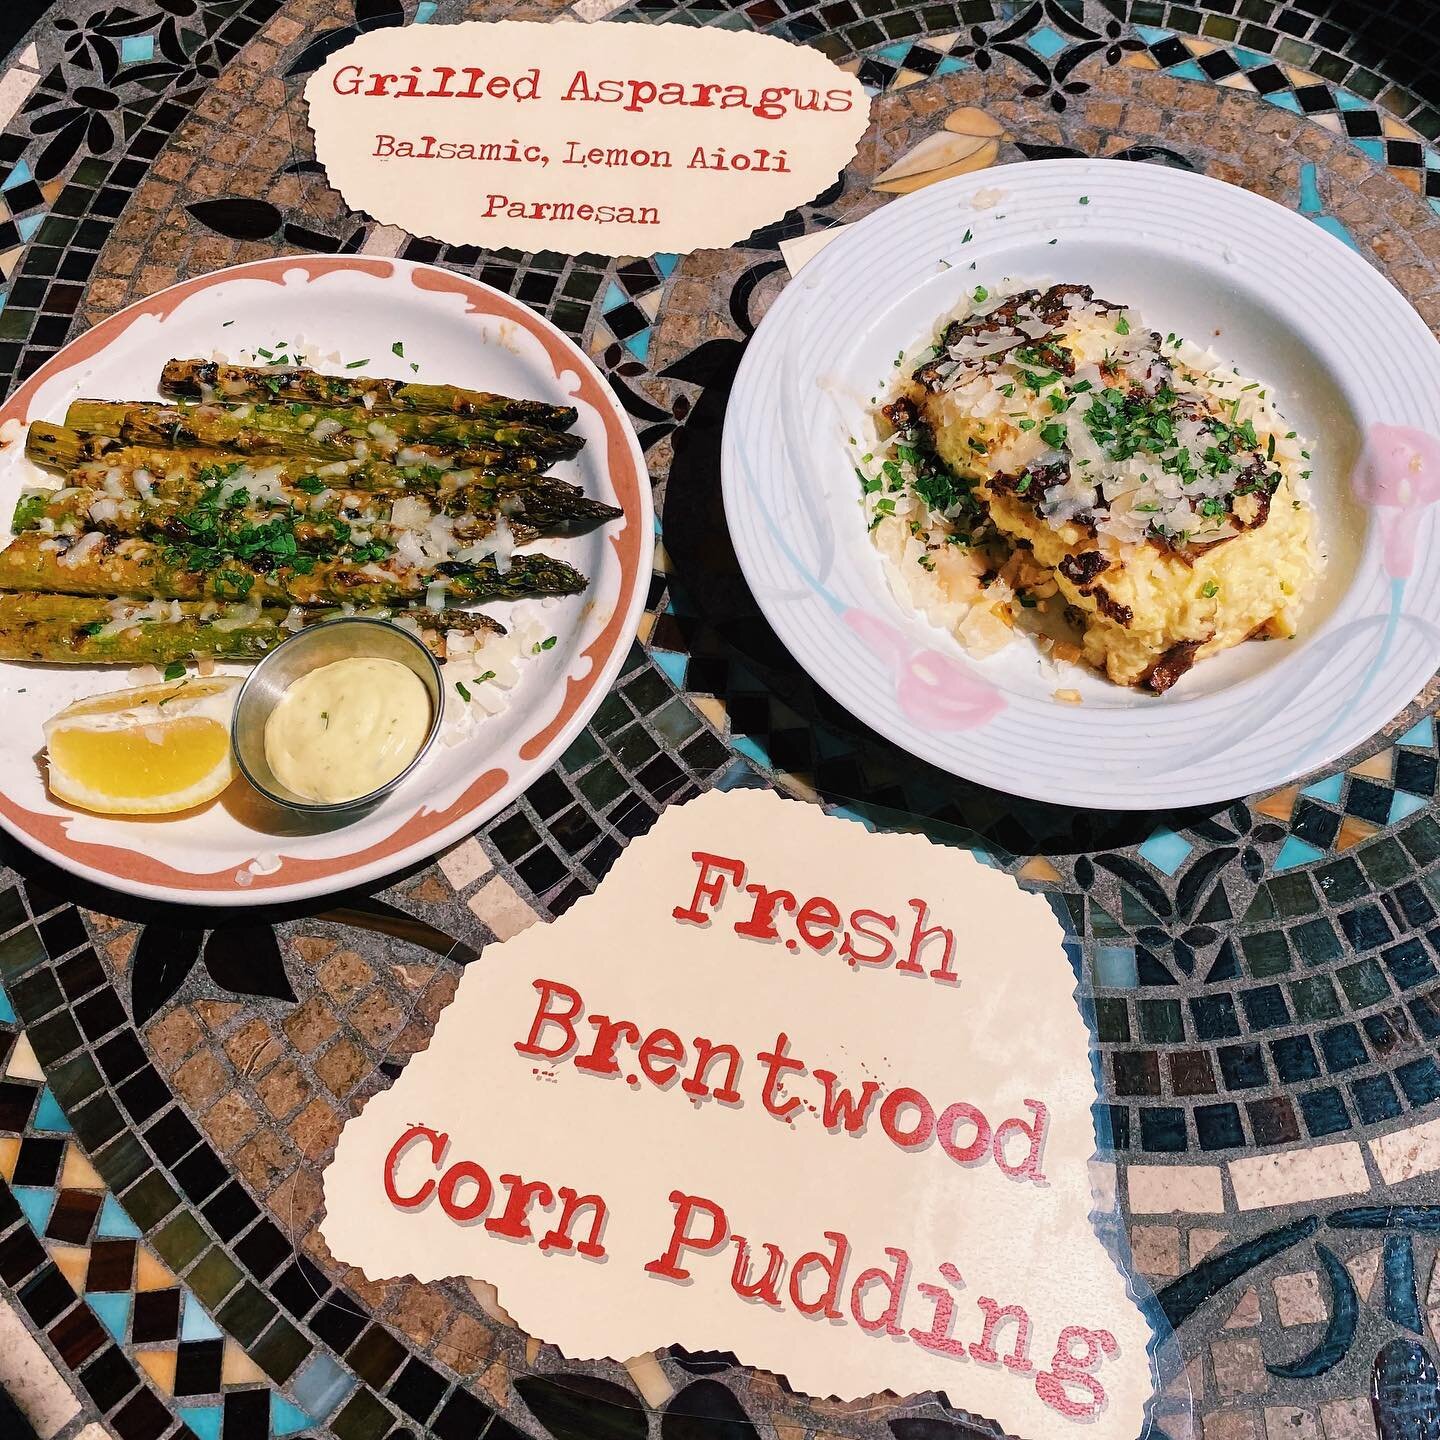 Enjoy your summer Sideboard style! Grilled asparagus AND fresh Brentwood corn pudding are back and better than ever 😋
&bull;
&bull;
&bull;
#restaurant #food #foodie #instafood #dinner #bar #delicious #yummy #foodphotography #foodlover #cafe #lunch #